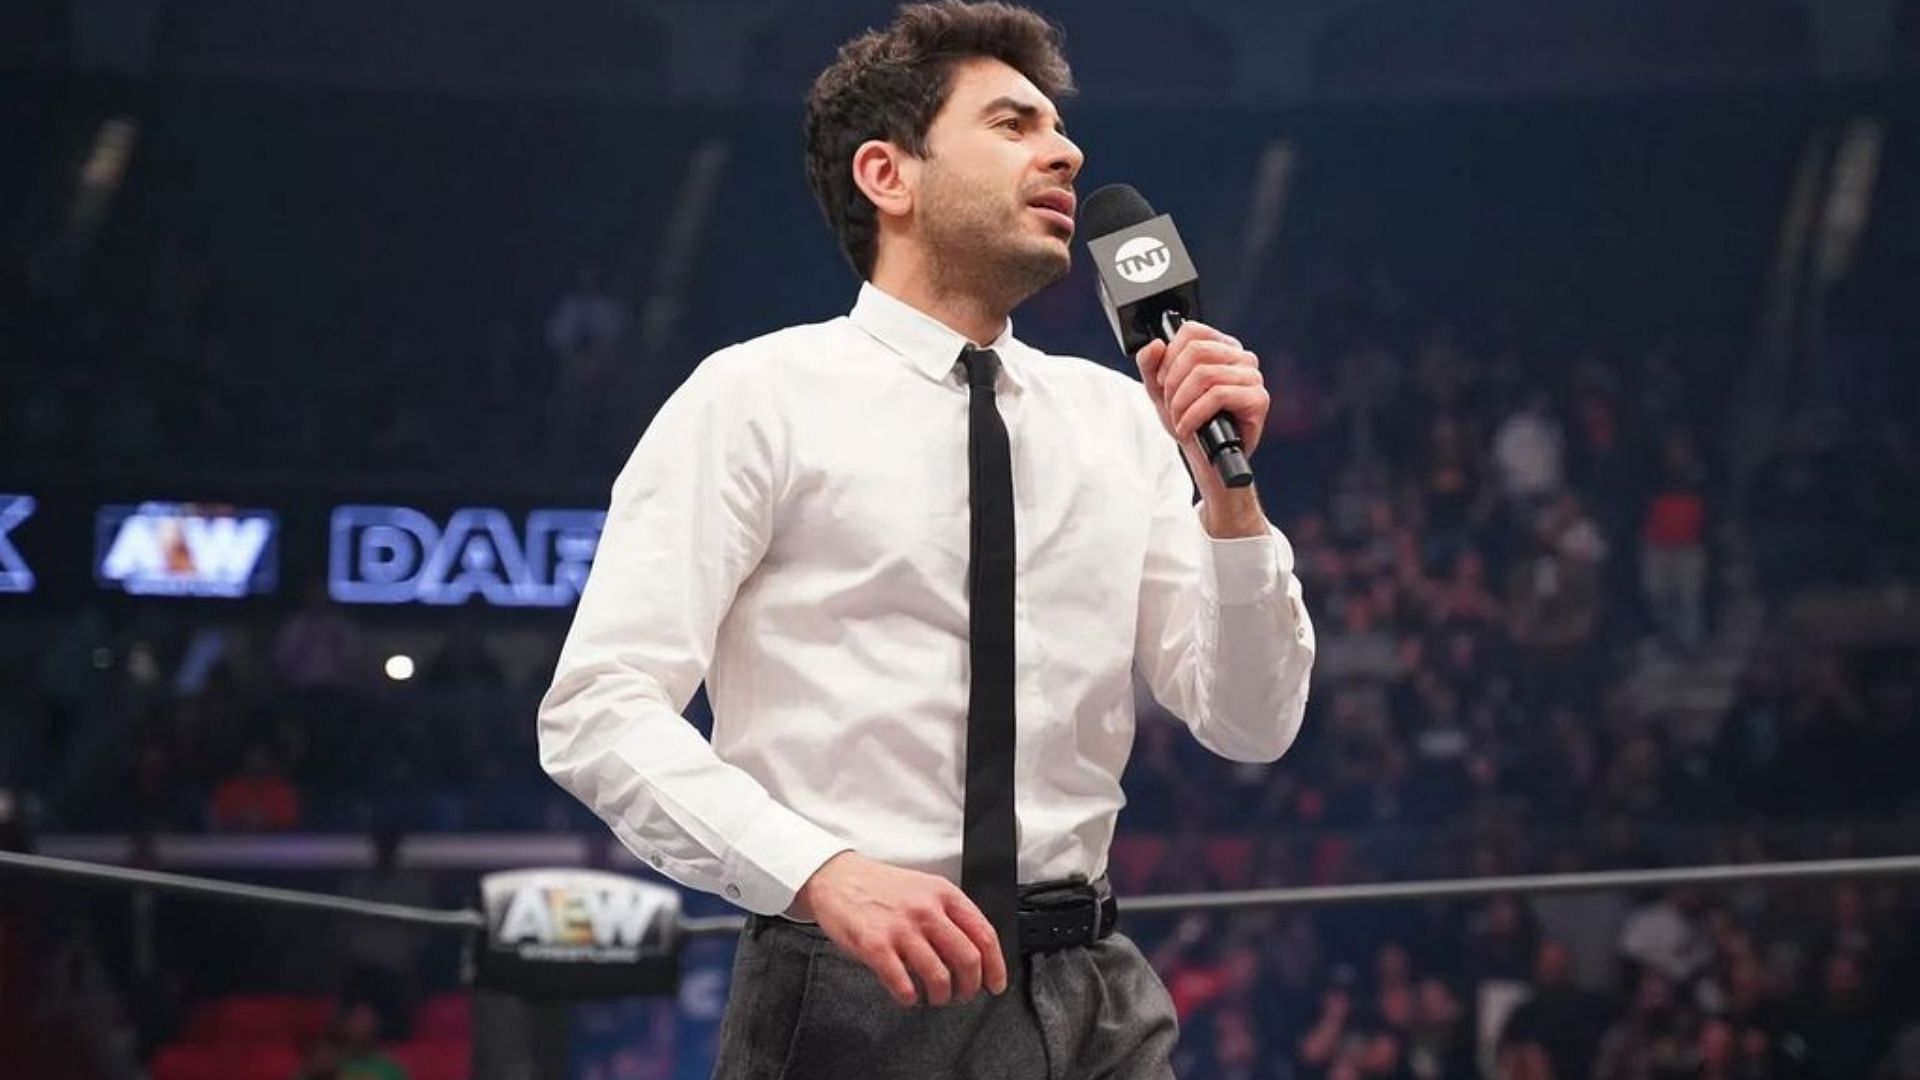 Has Tony Khan scrapped one of his shows?